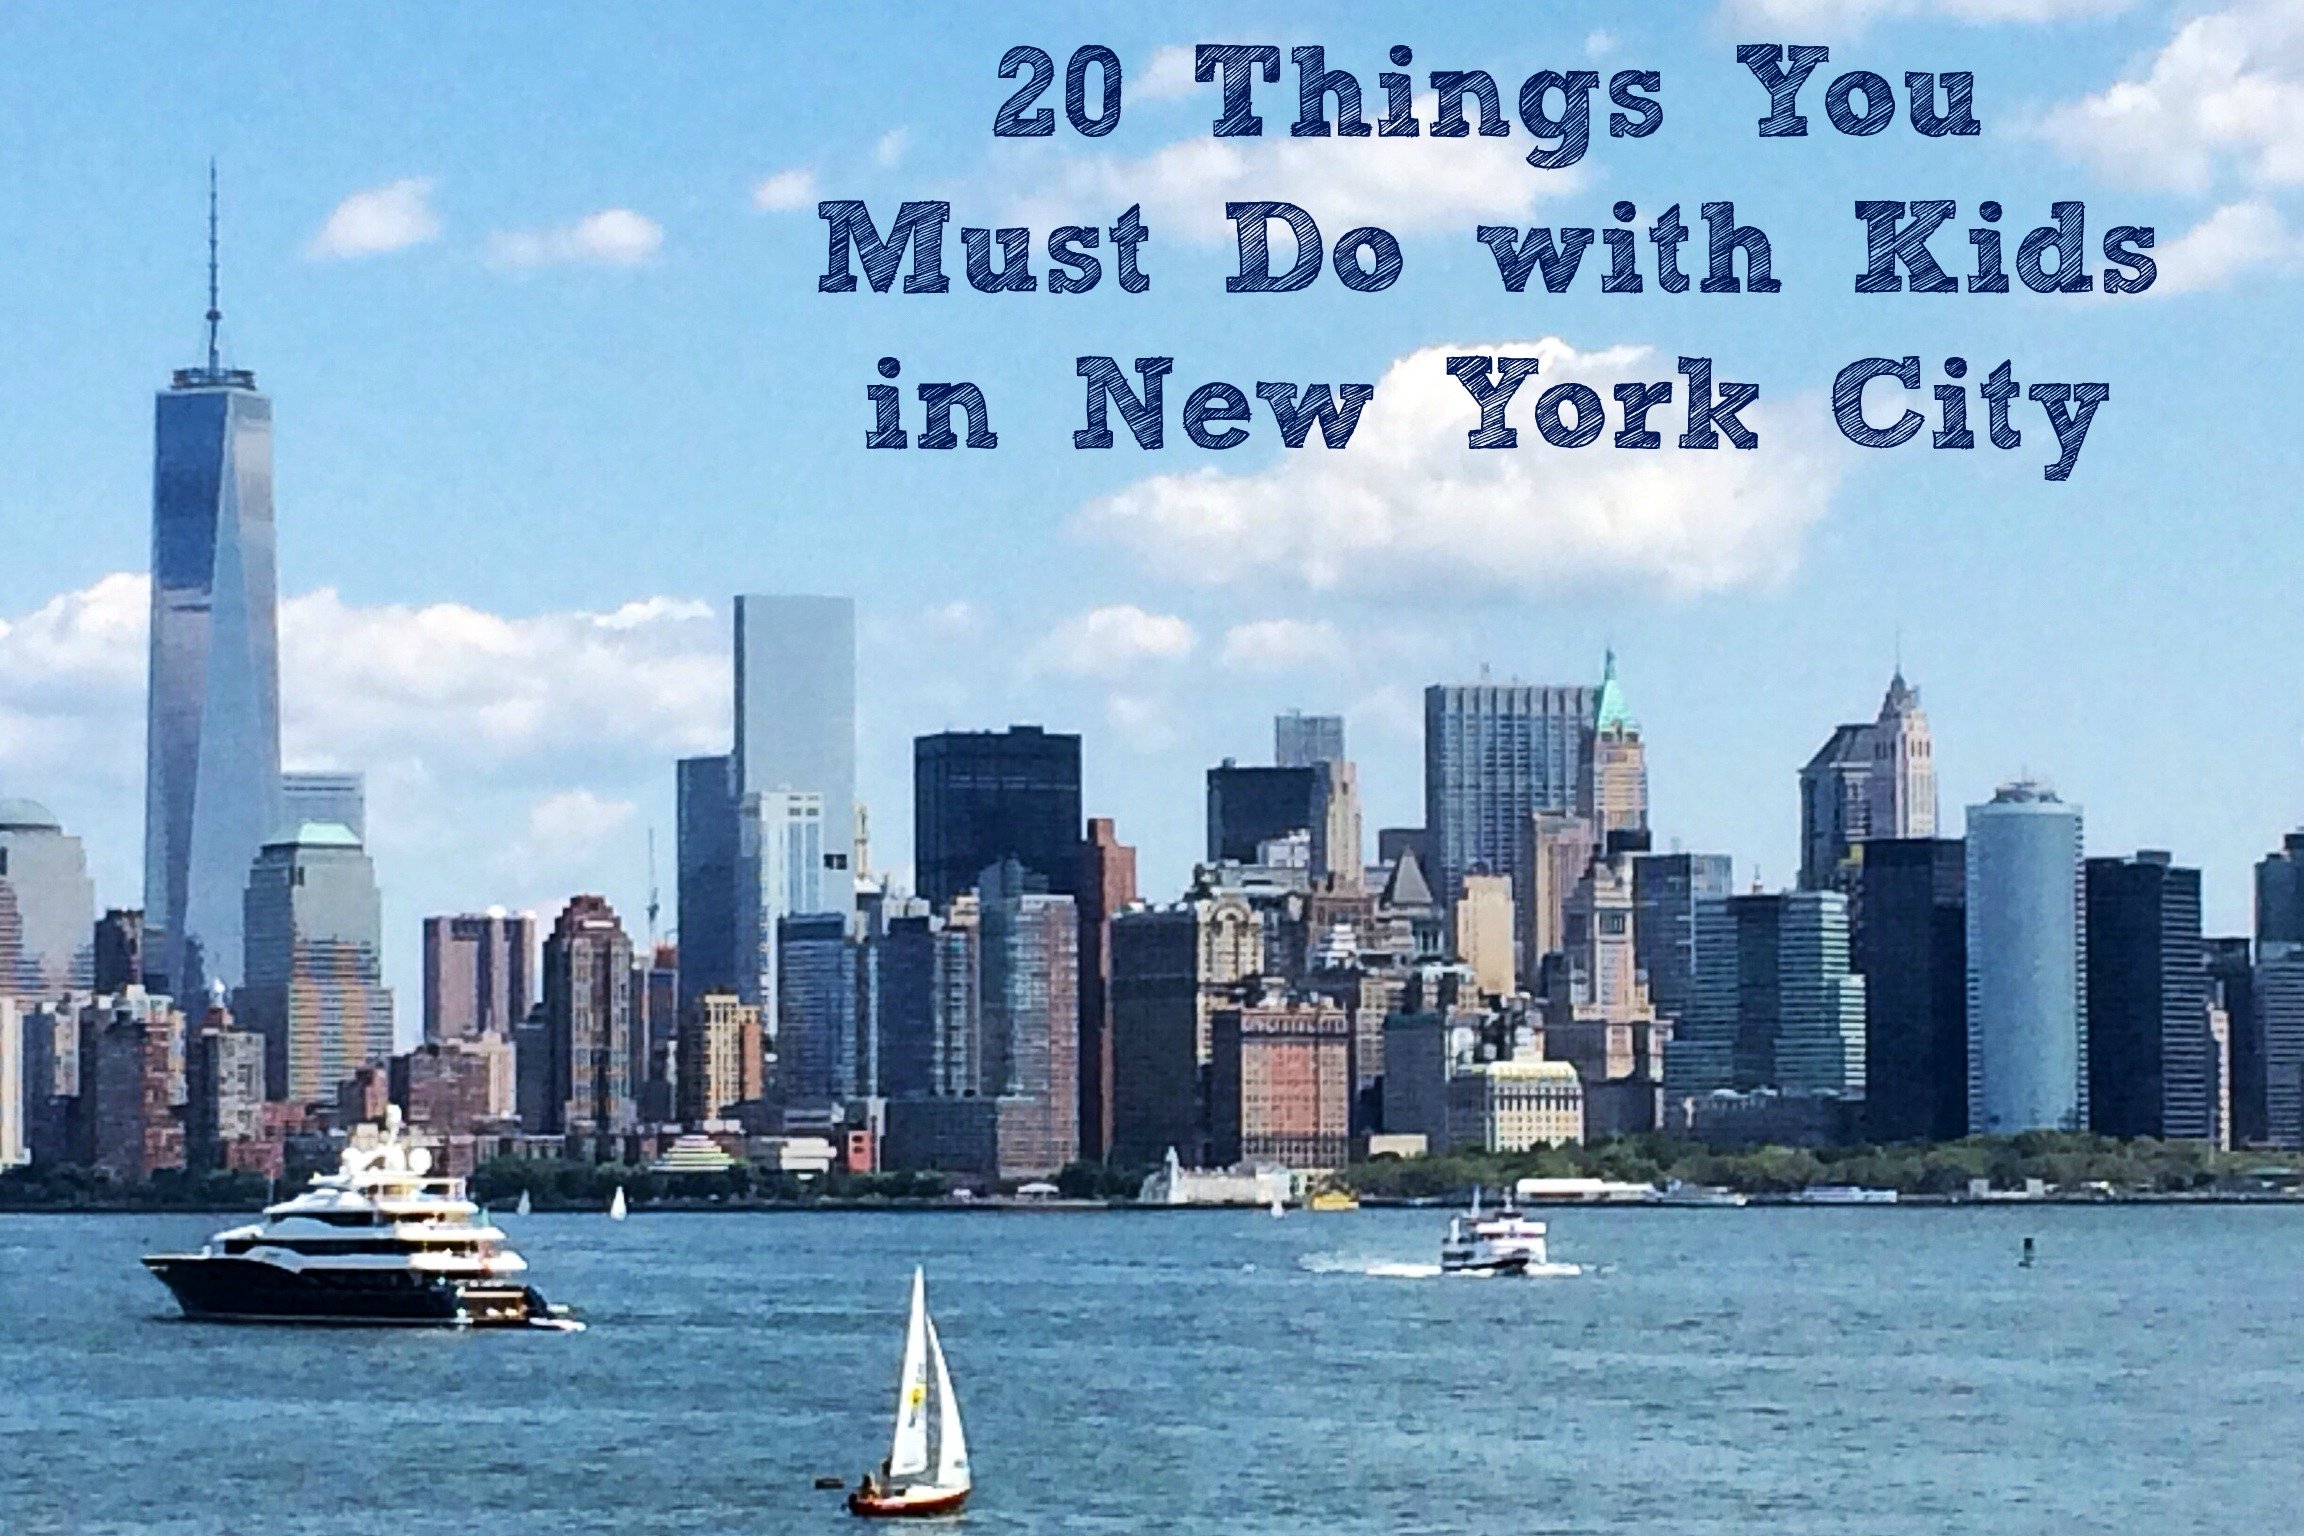 20 Things You Must Do with Kids in New York City ...